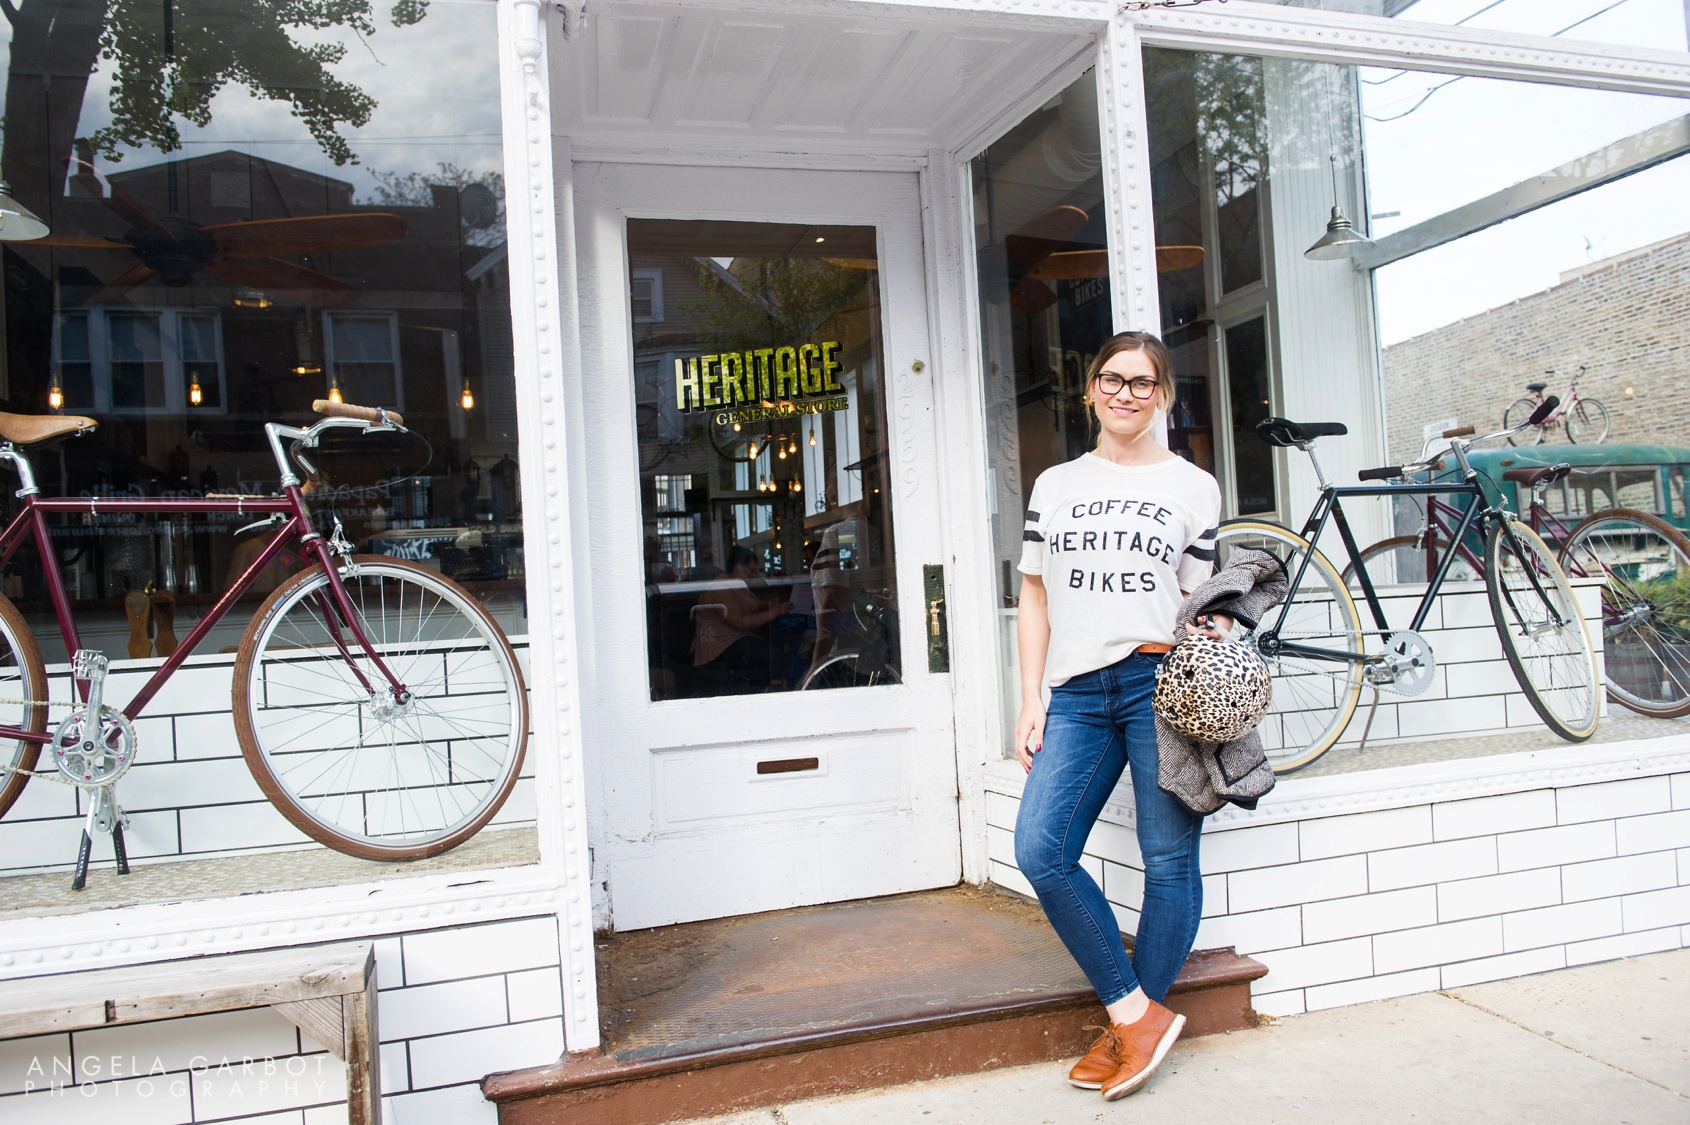 Branding photography of Lynzie Smith at Heritage Bicycles Coffee shop in Chicago by Angela Garbot Photography